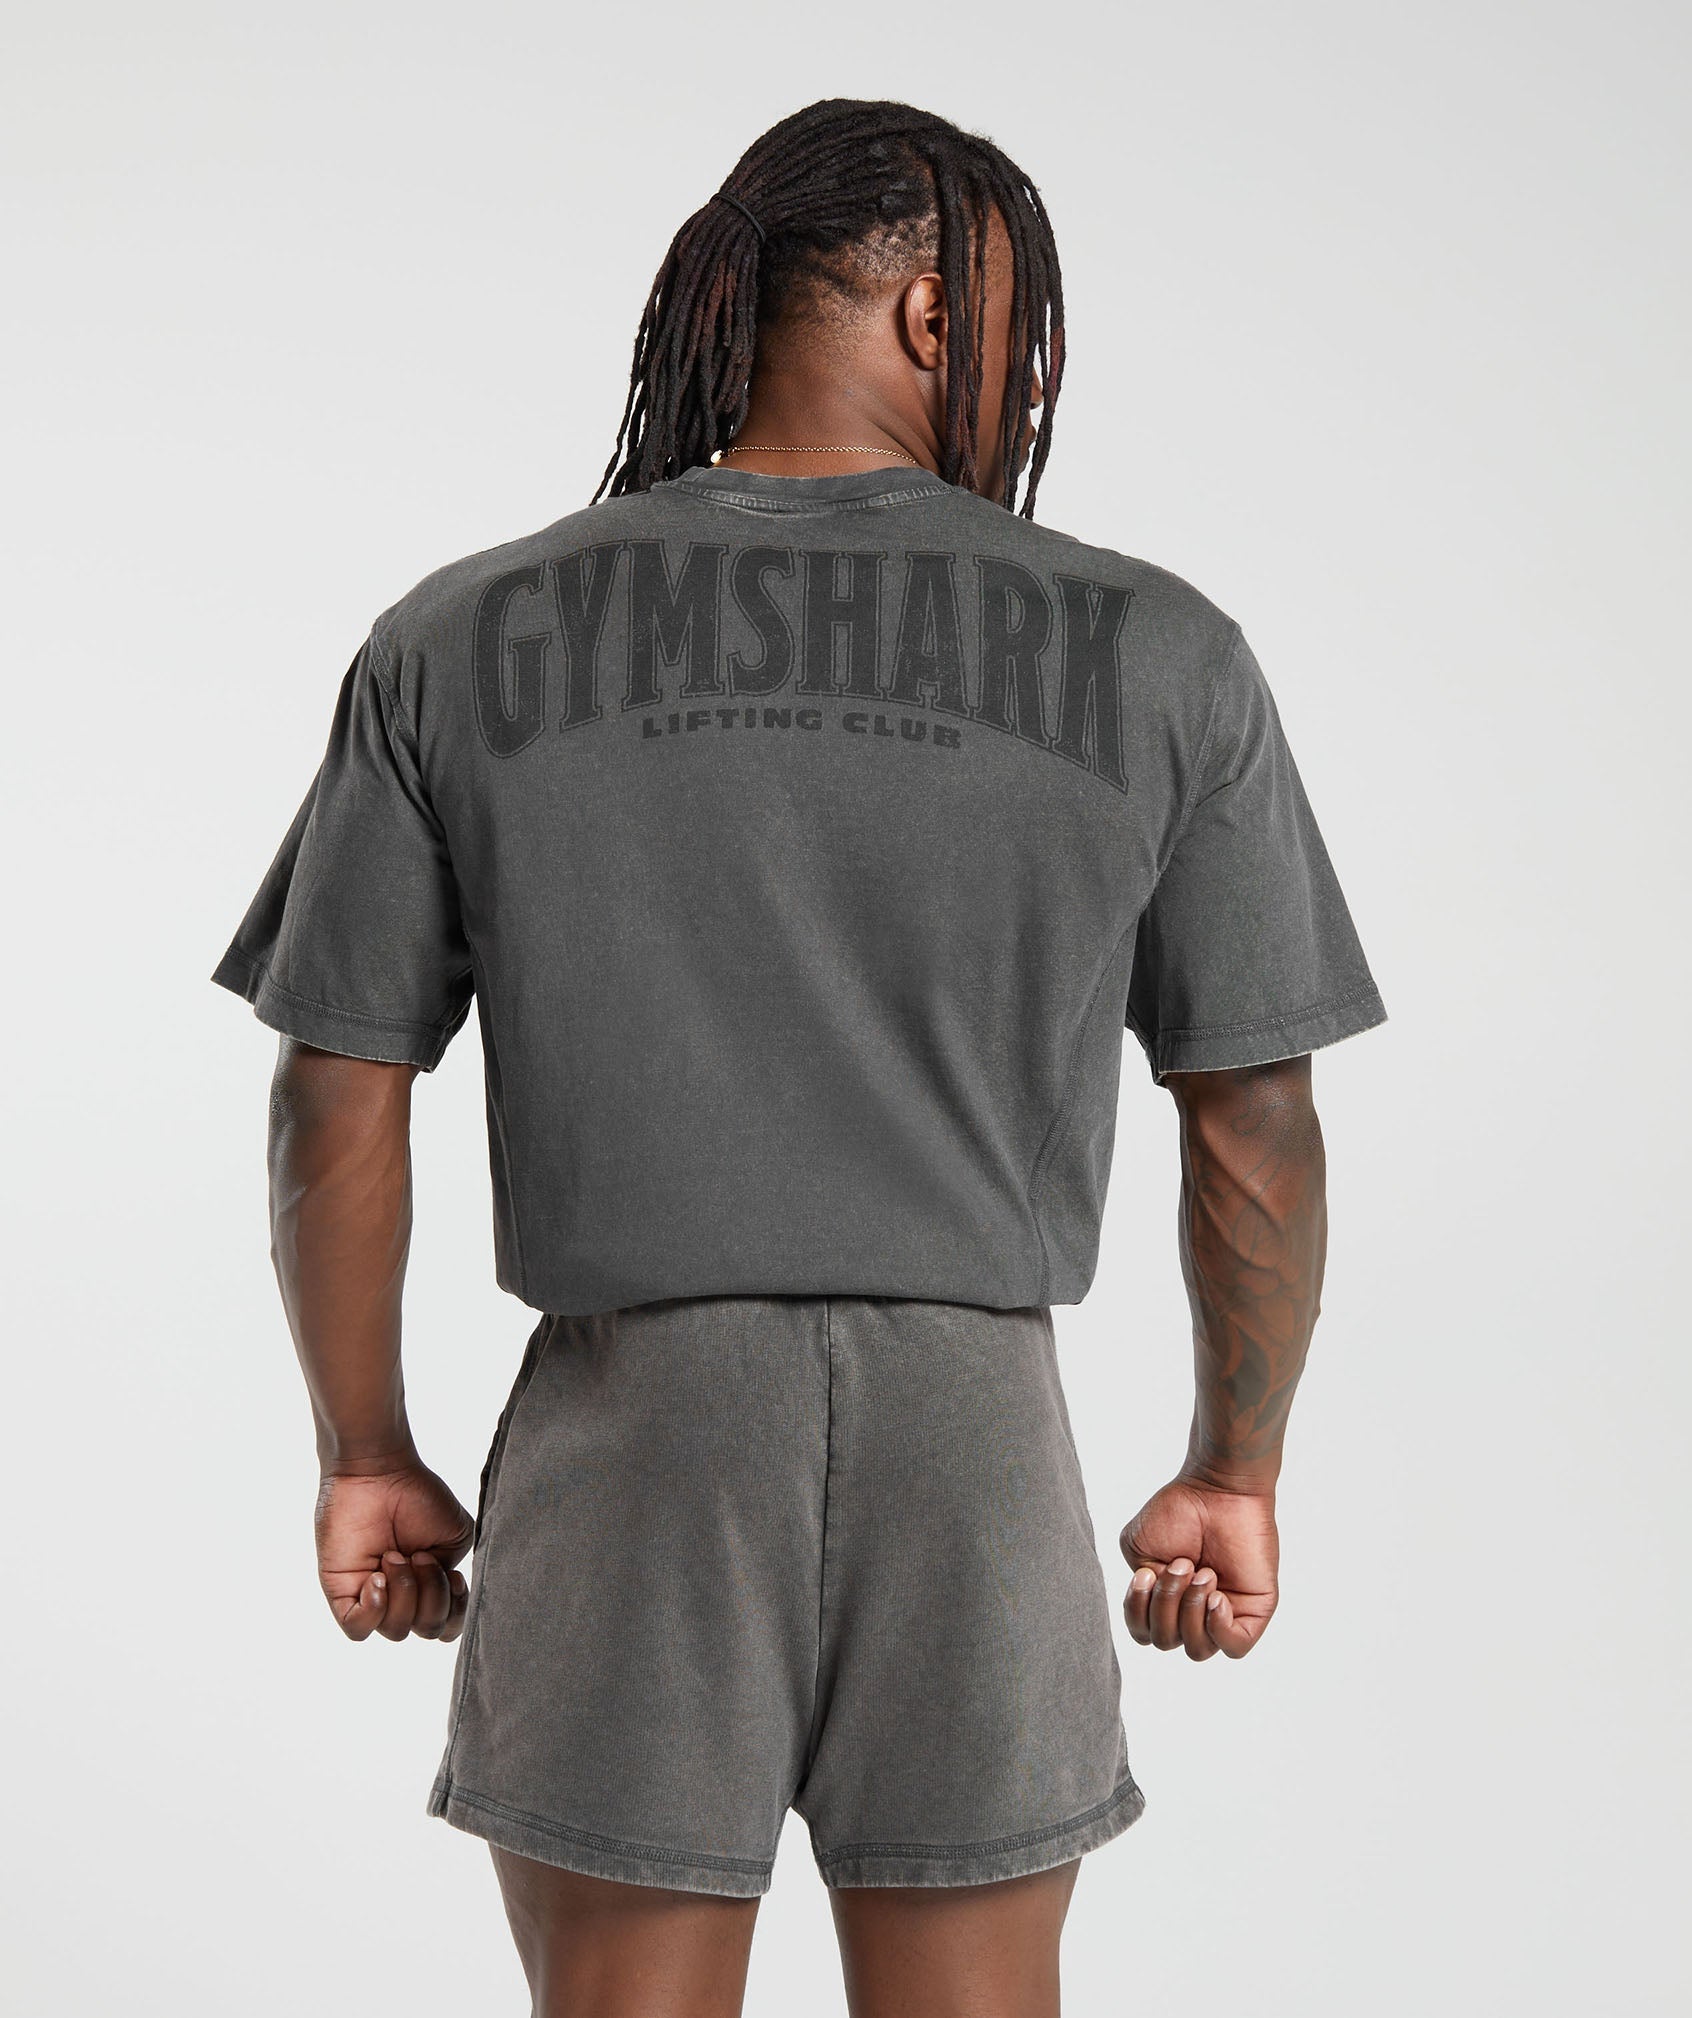 Heritage Washed T-Shirt in Onyx Grey - view 1